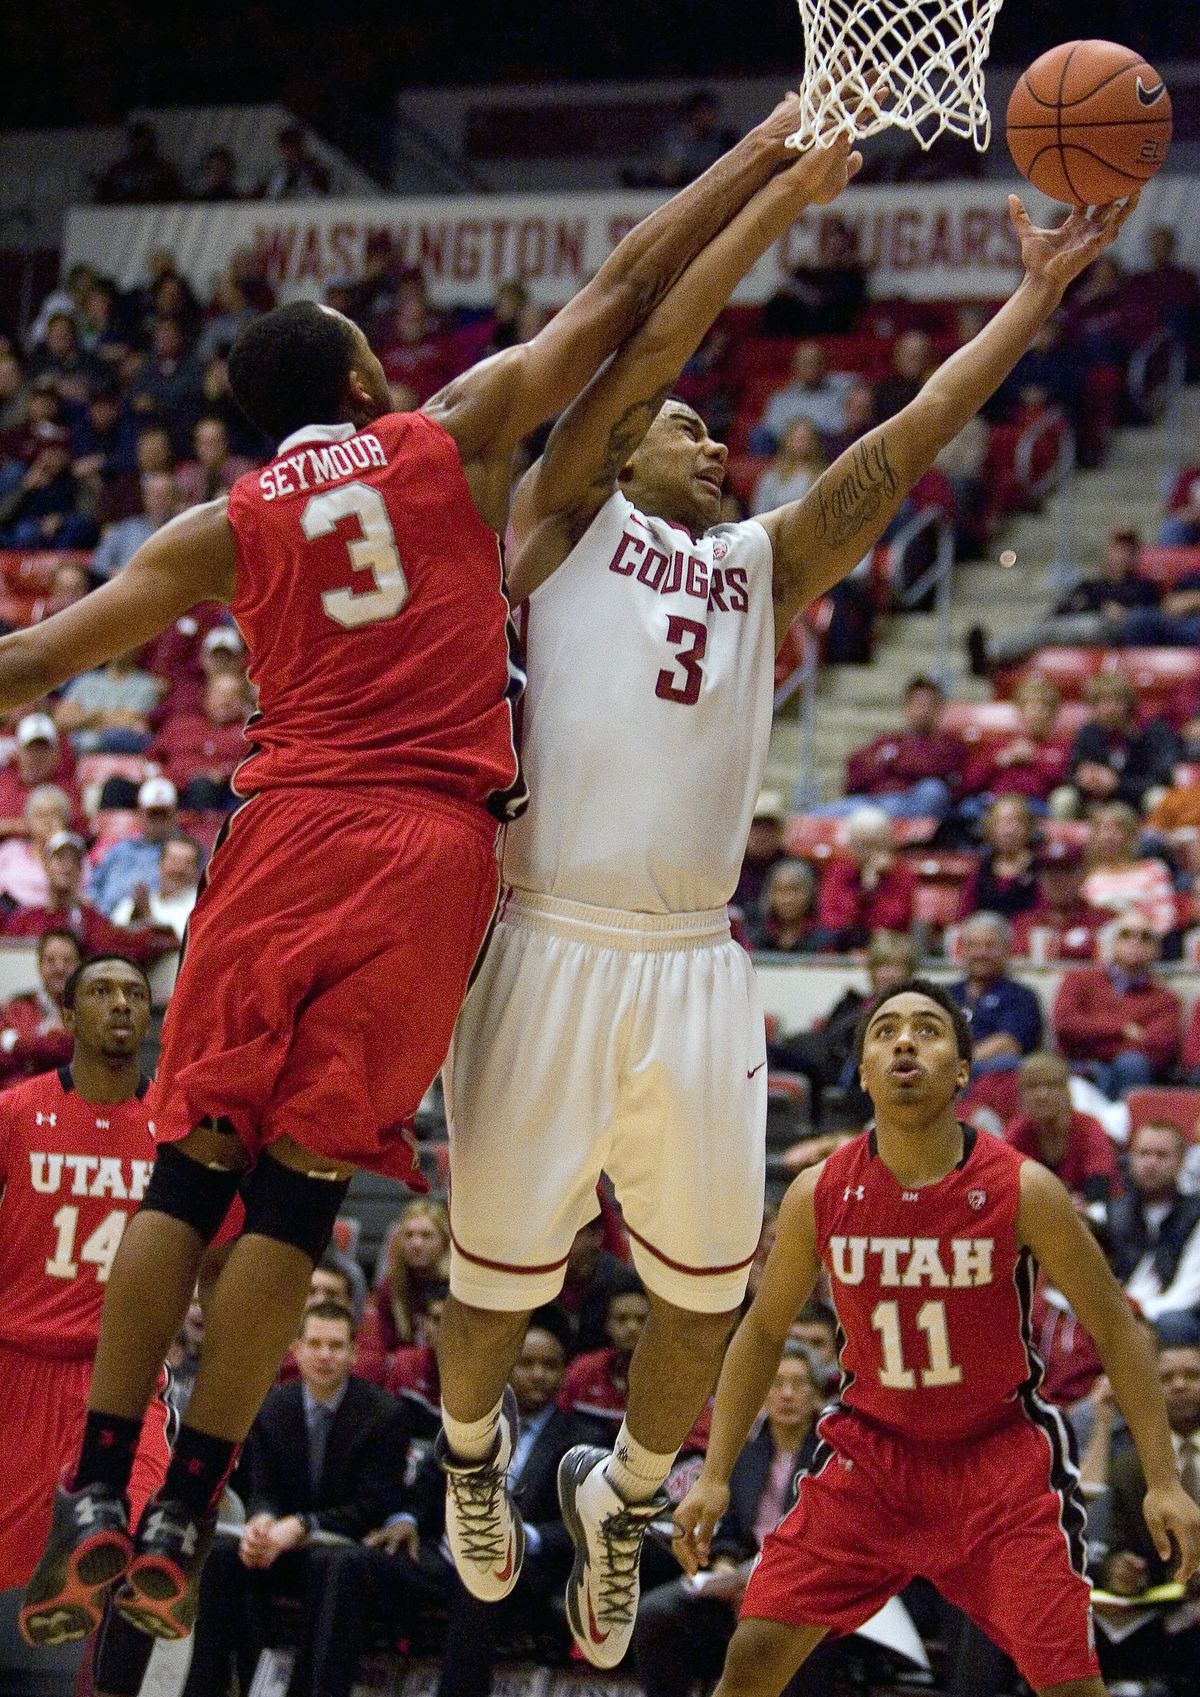 Utah’s Justin Seymour fouls Washington State’s DaVonte Lacy during the second half. (Associated Press)